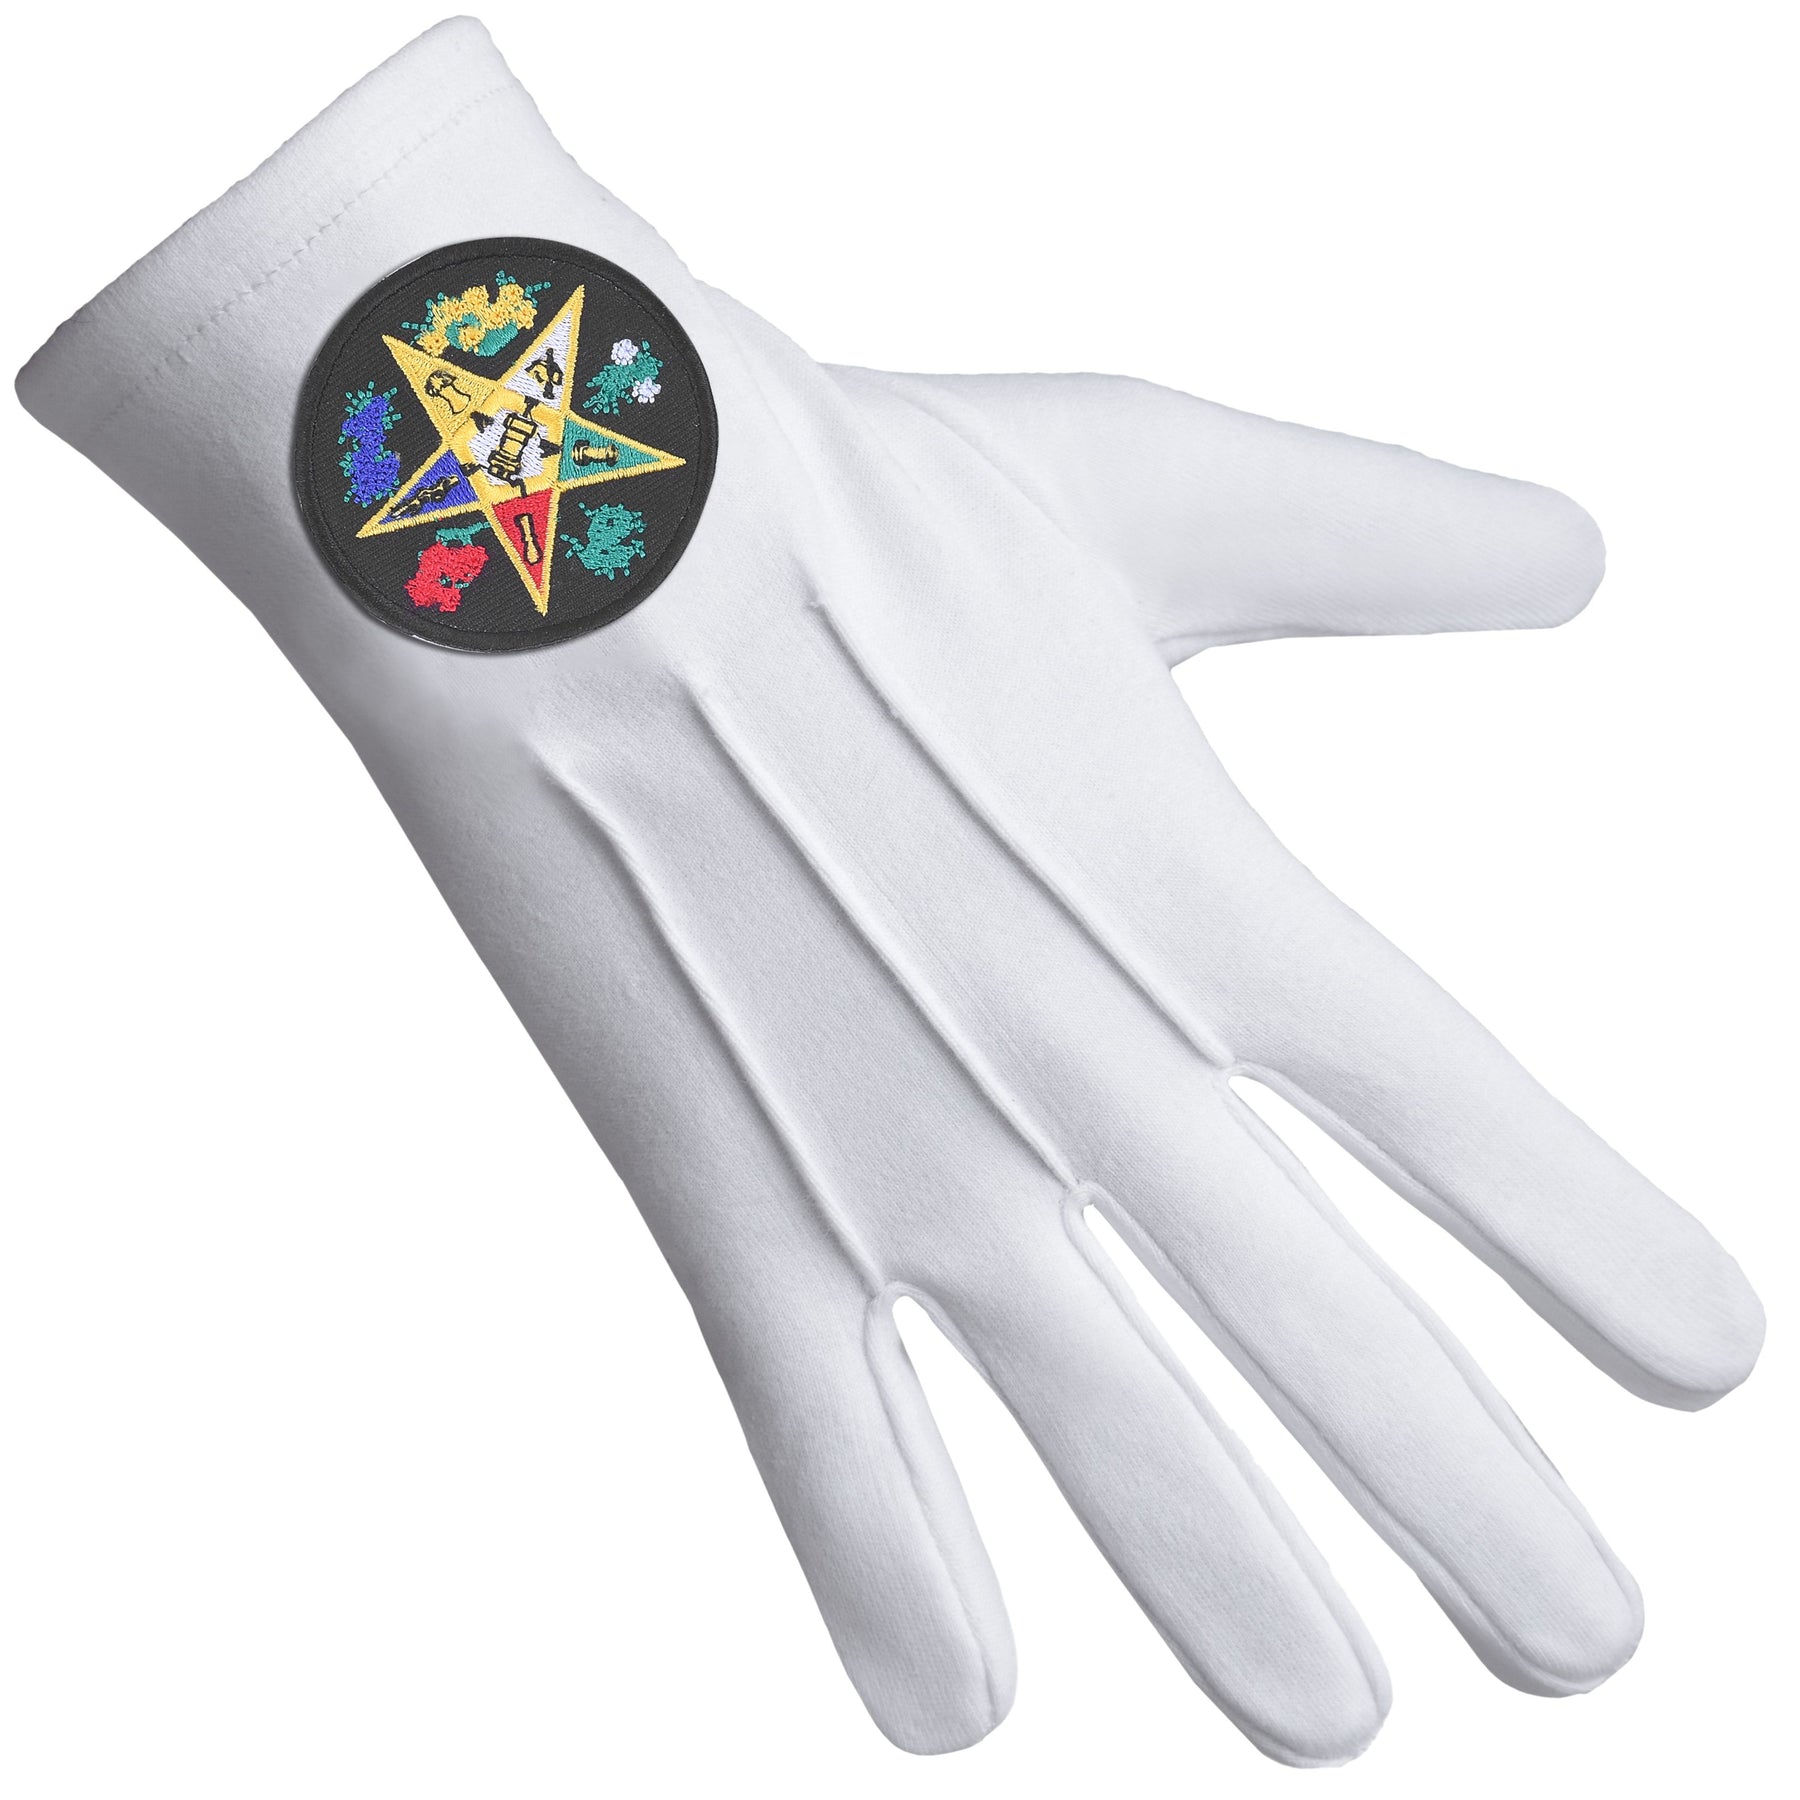 OES Glove - Black Patch With Colorful Star - Bricks Masons